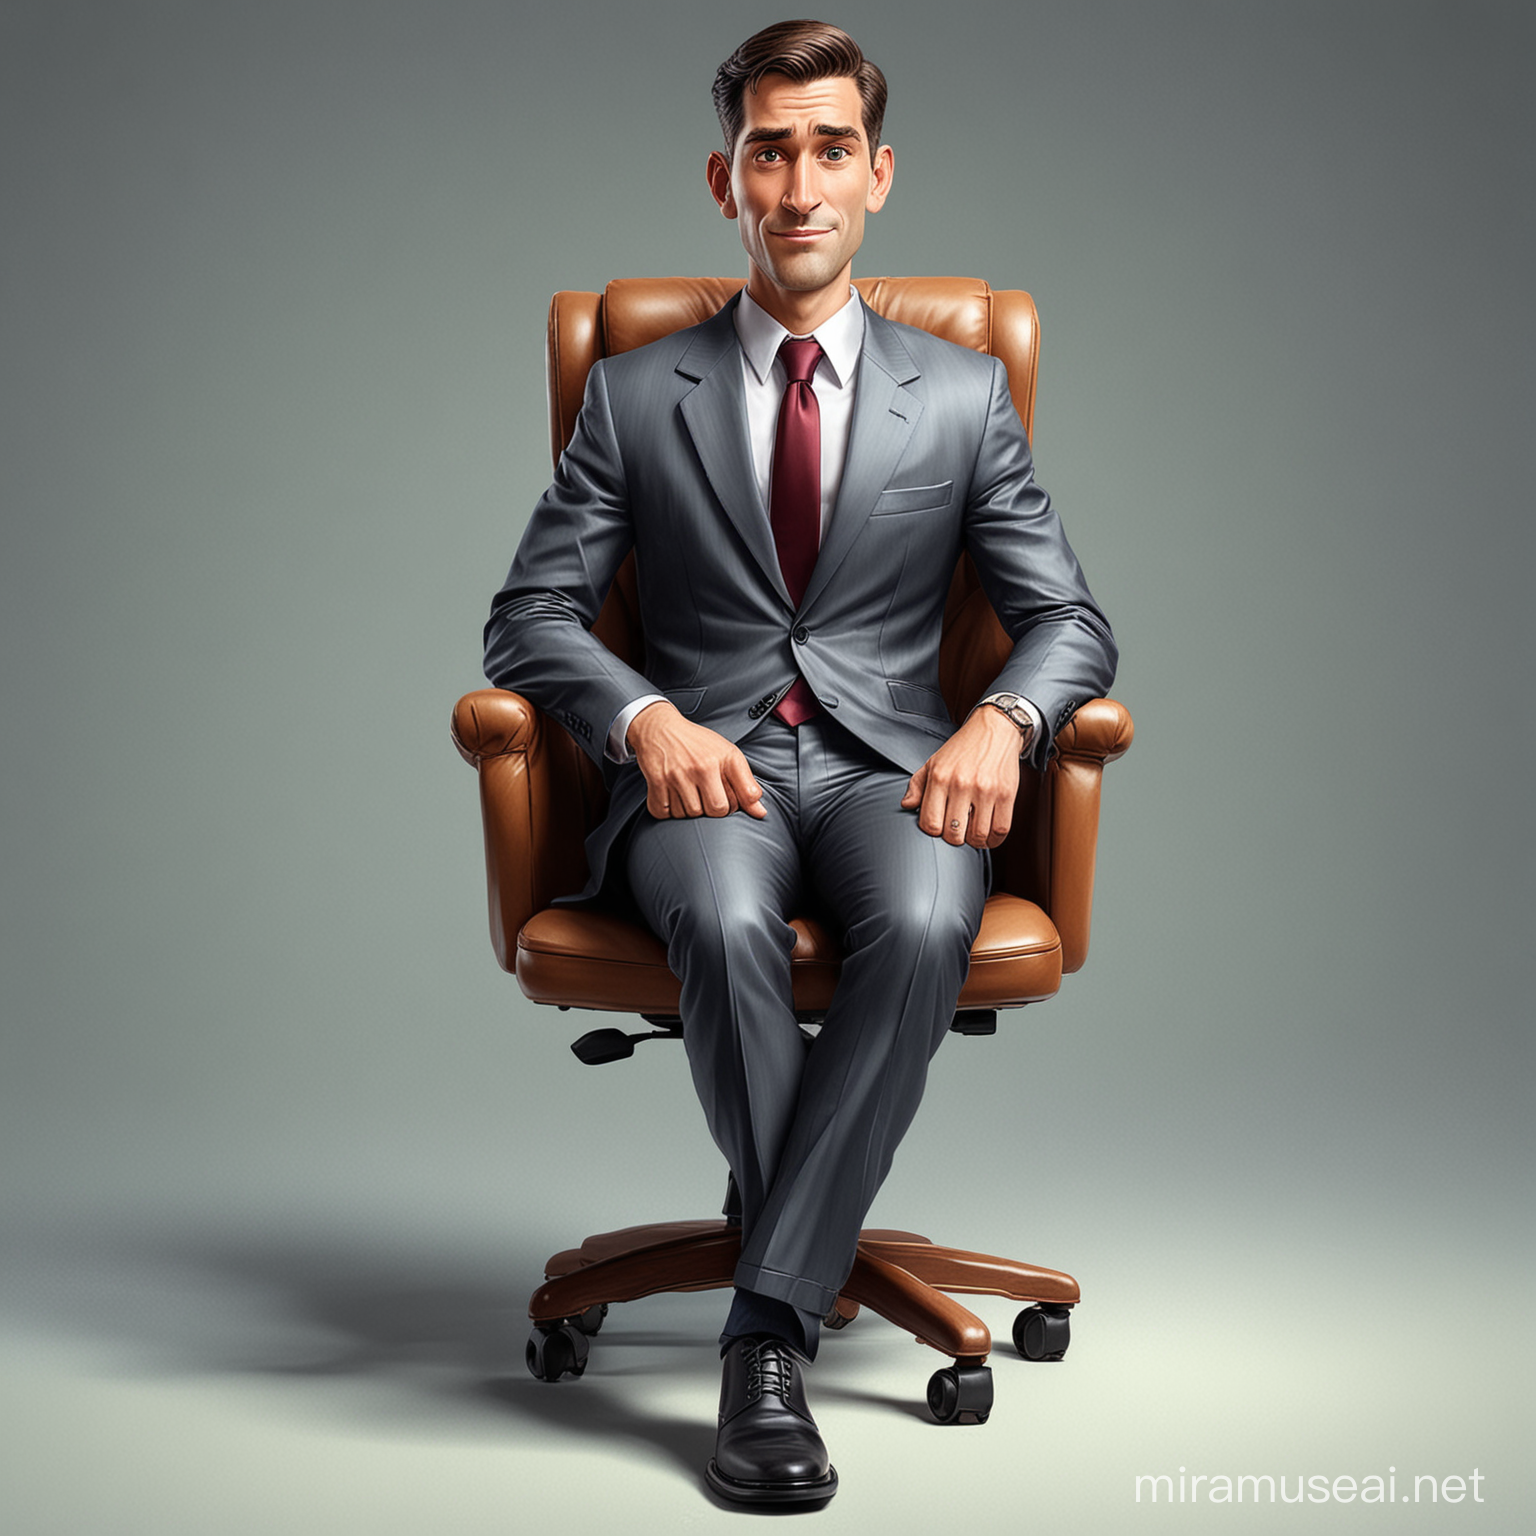 Businessman in 3Piece Suit Sitting on Office Chair Detailed Oil Painting Style Artwork